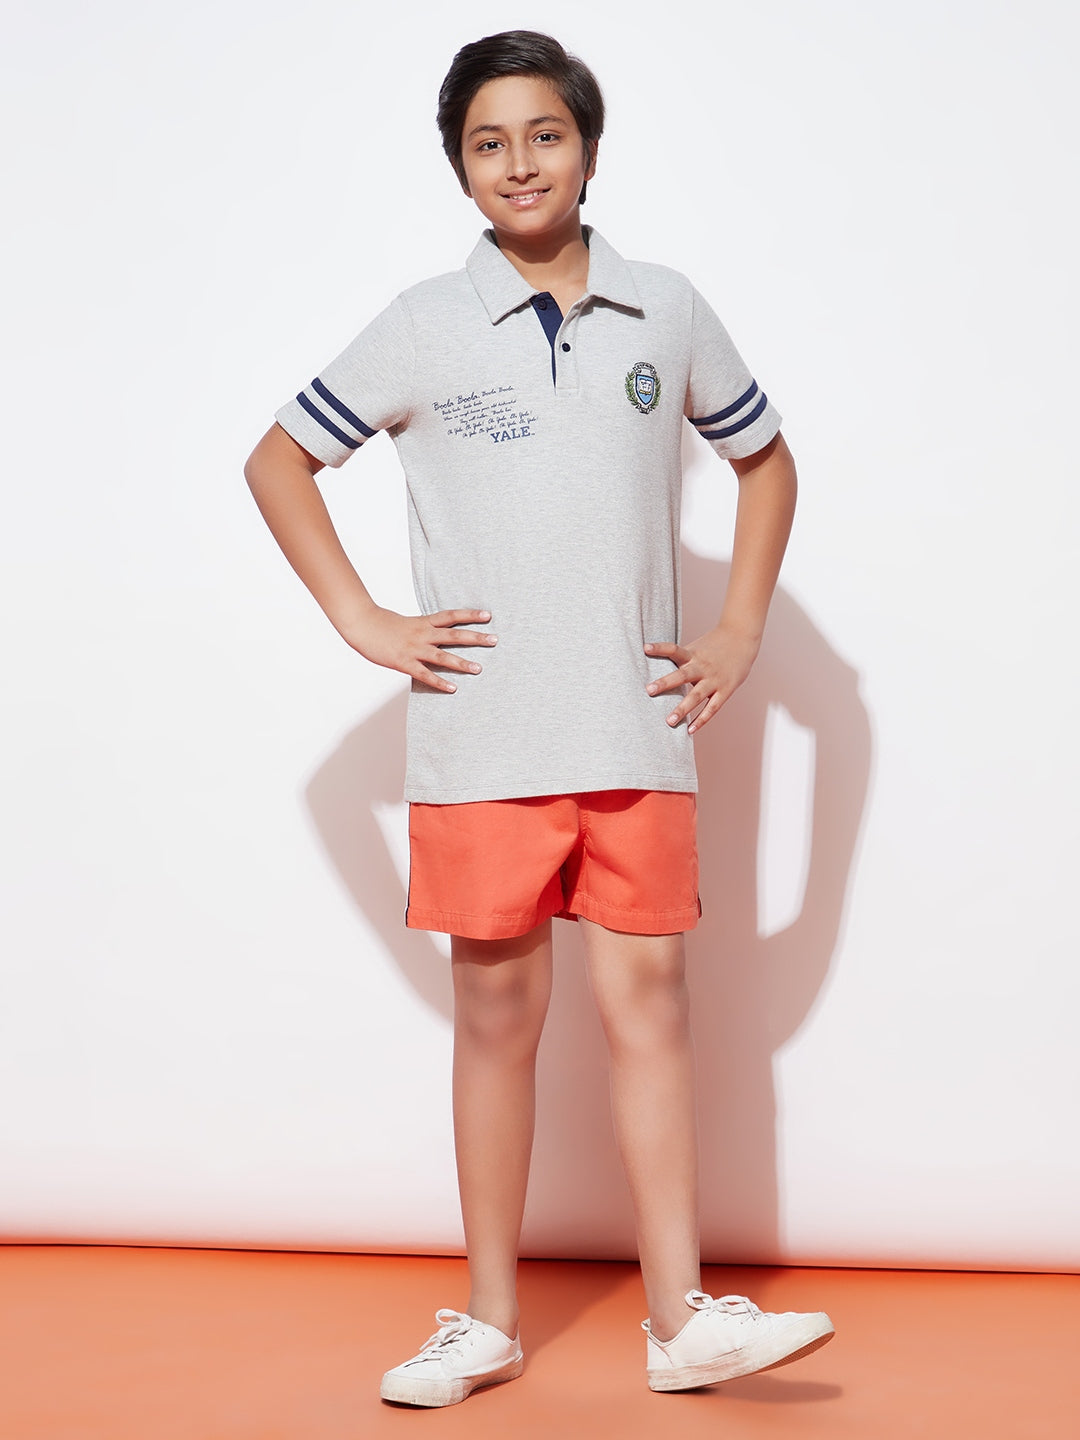 Teen Boys' Grey Collared T-Shirt with Blue Stripes and Orange Shorts Set